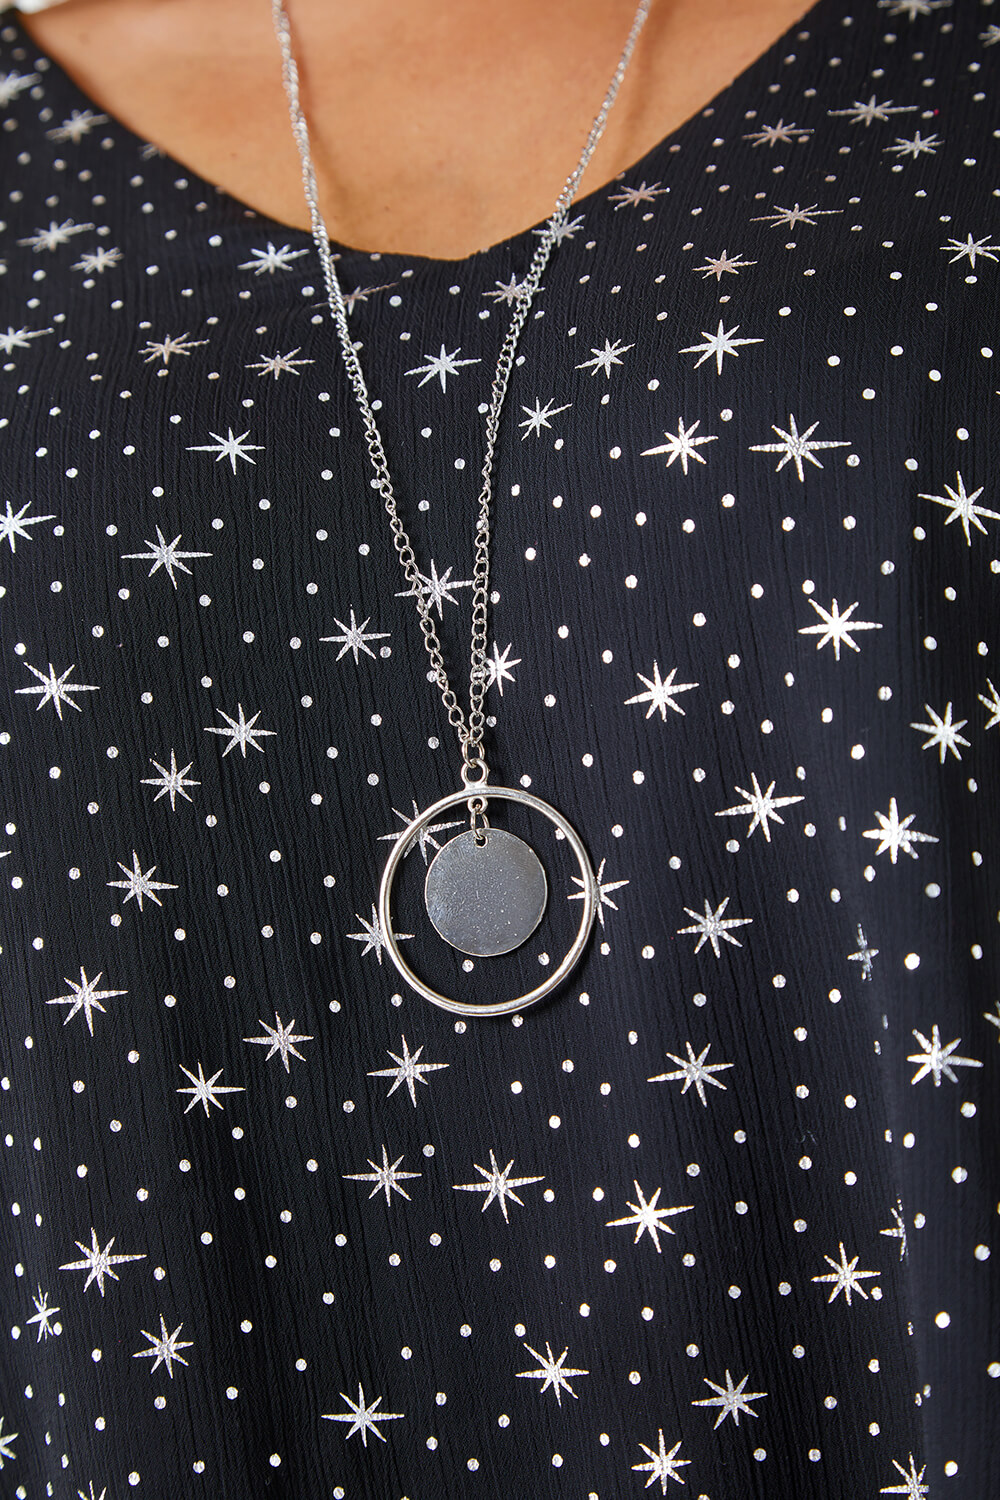 Silver Curve Metallic Star Necklace Top, Image 5 of 5